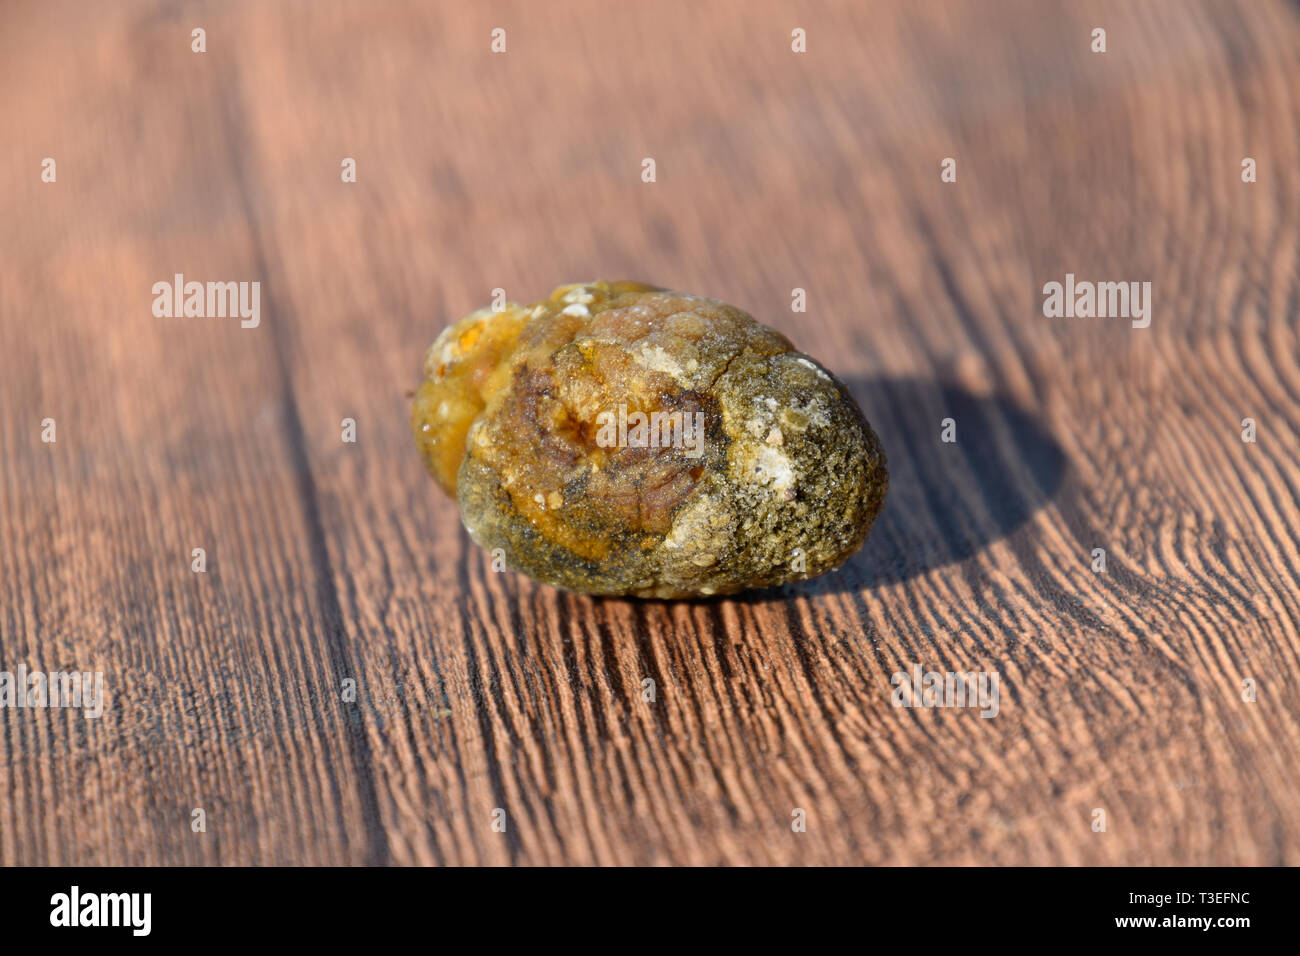 Stone of the gallbladder. The result of gallstones. A calculus of dissimilar composition on a wooden background. Stock Photo